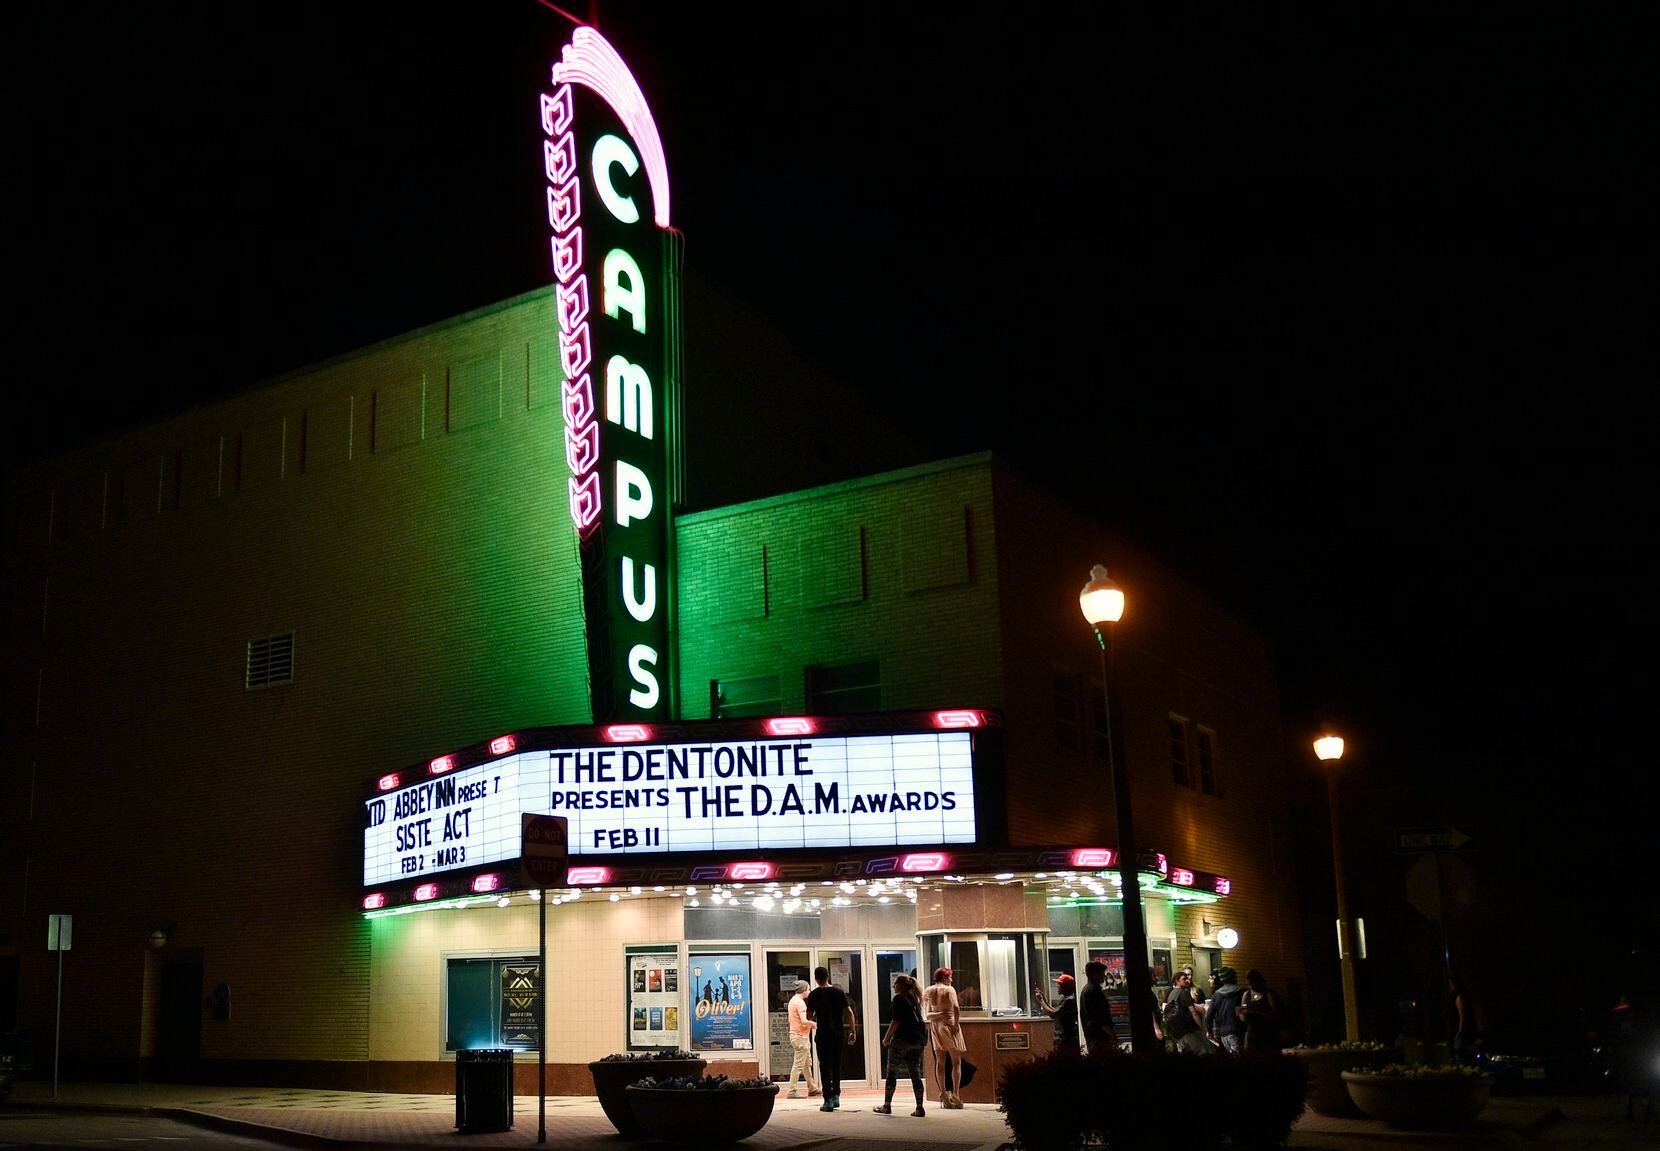 The Campus Theatre helped bring a cultural revival to downtown Denton.